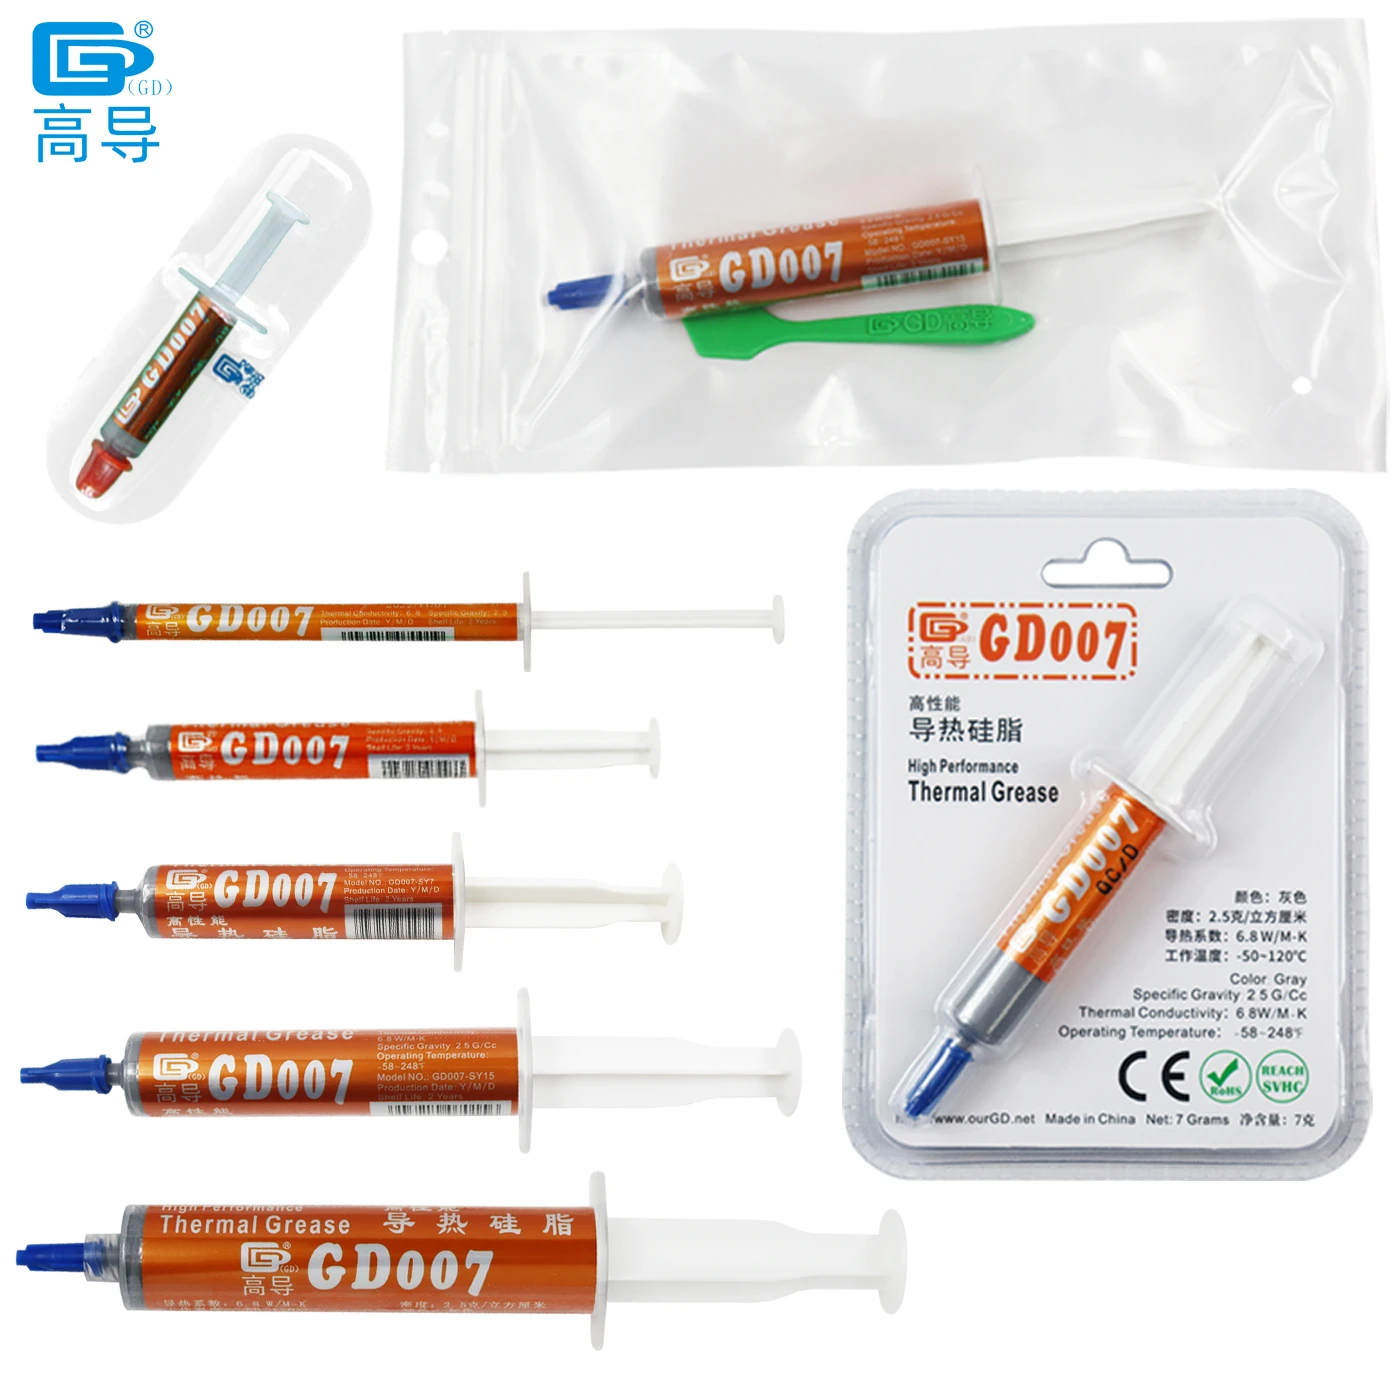 Net Weight 0.5/1/3/7/15/30/150 Grams GD007 Thermal Conductive Grease Paste Plaster Heat Sink Compound SSY SY BX CN ST CB MB